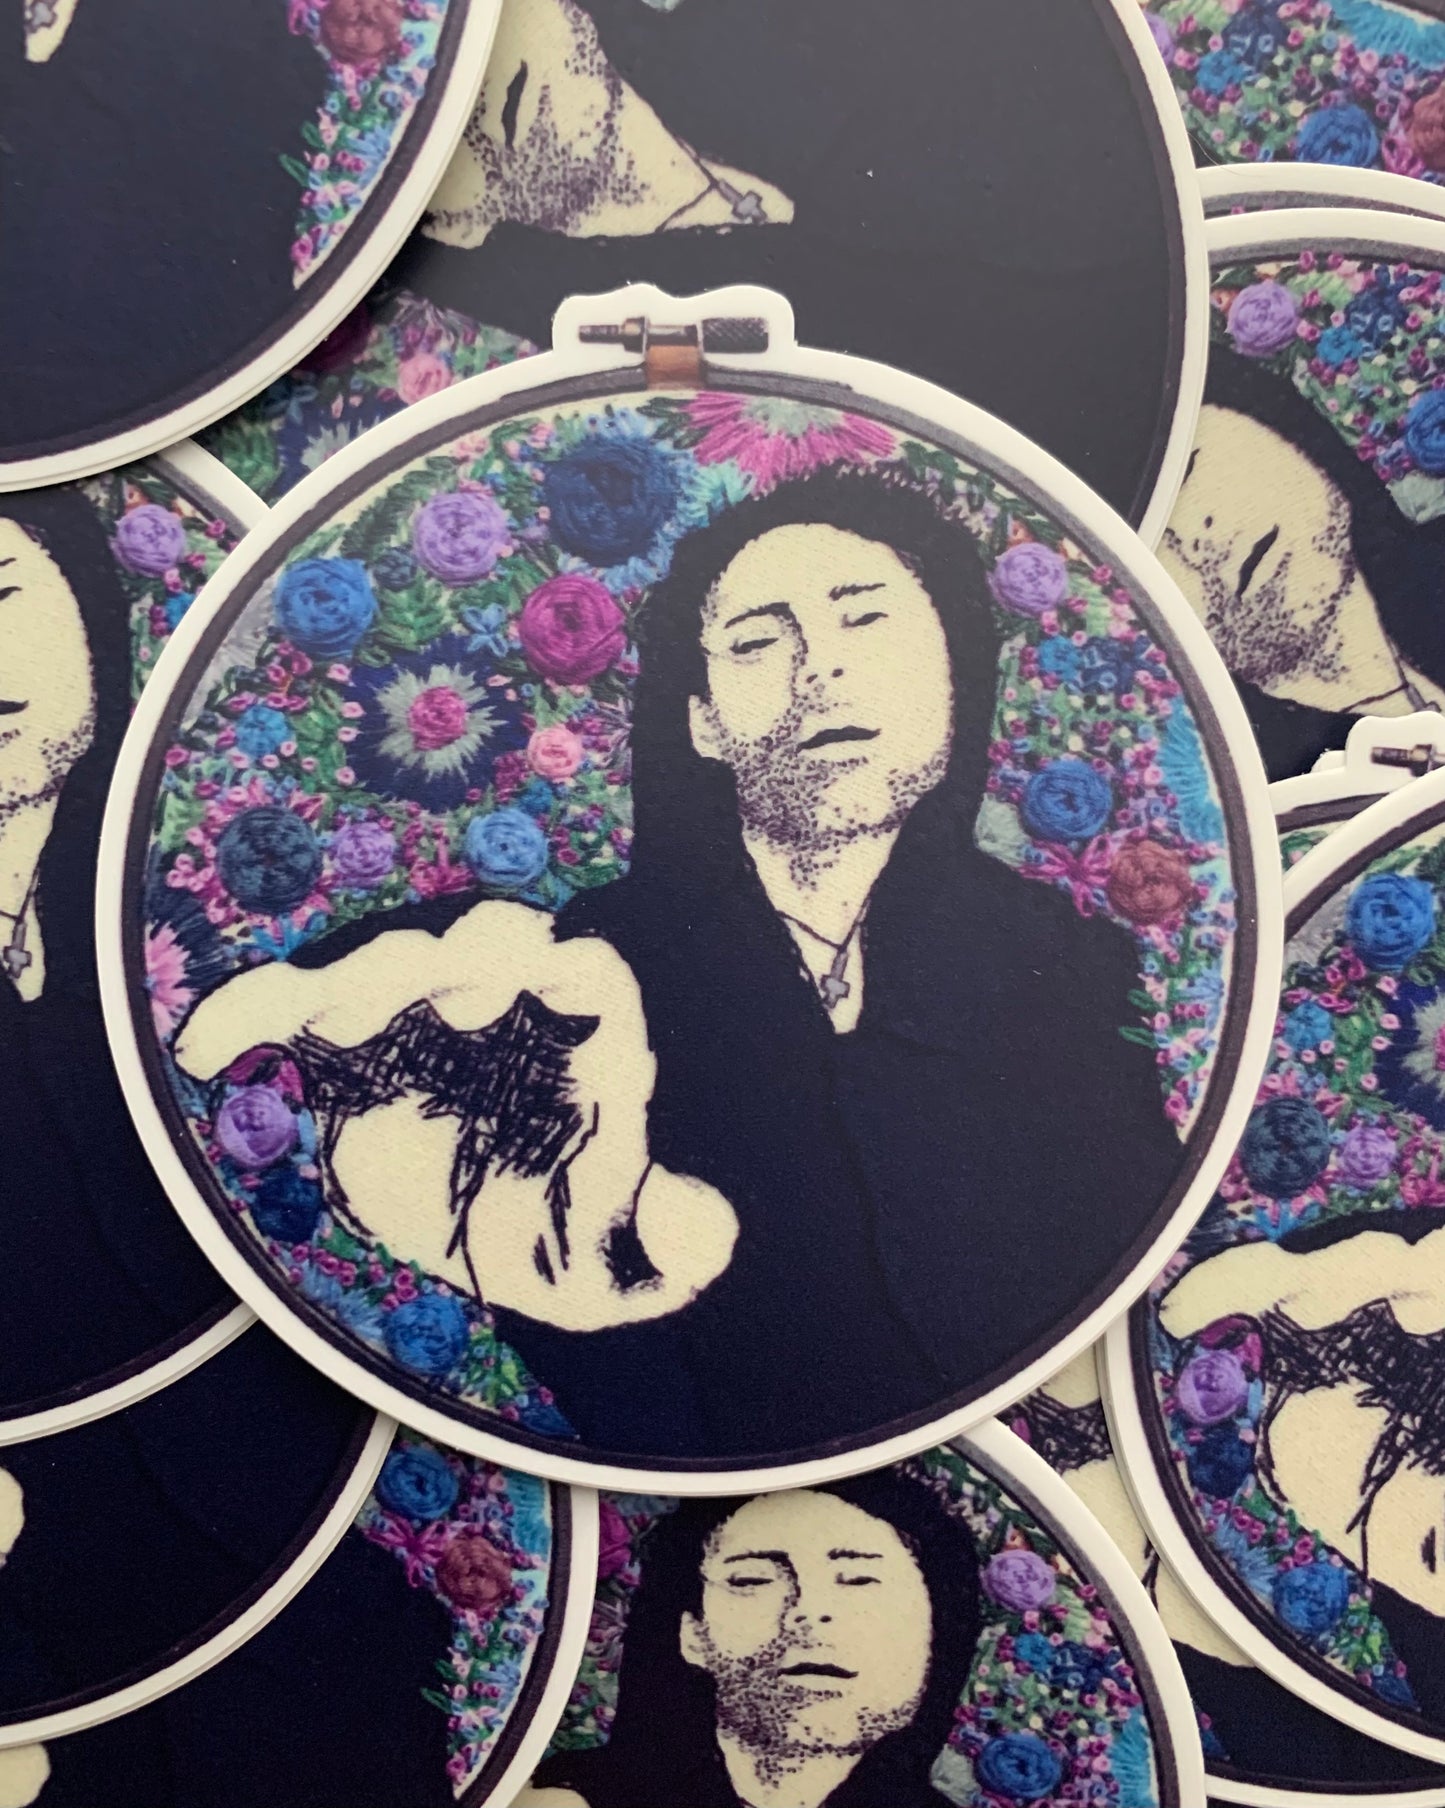 Davey Havok with purple flowers embroidery sticker pile of awesome!